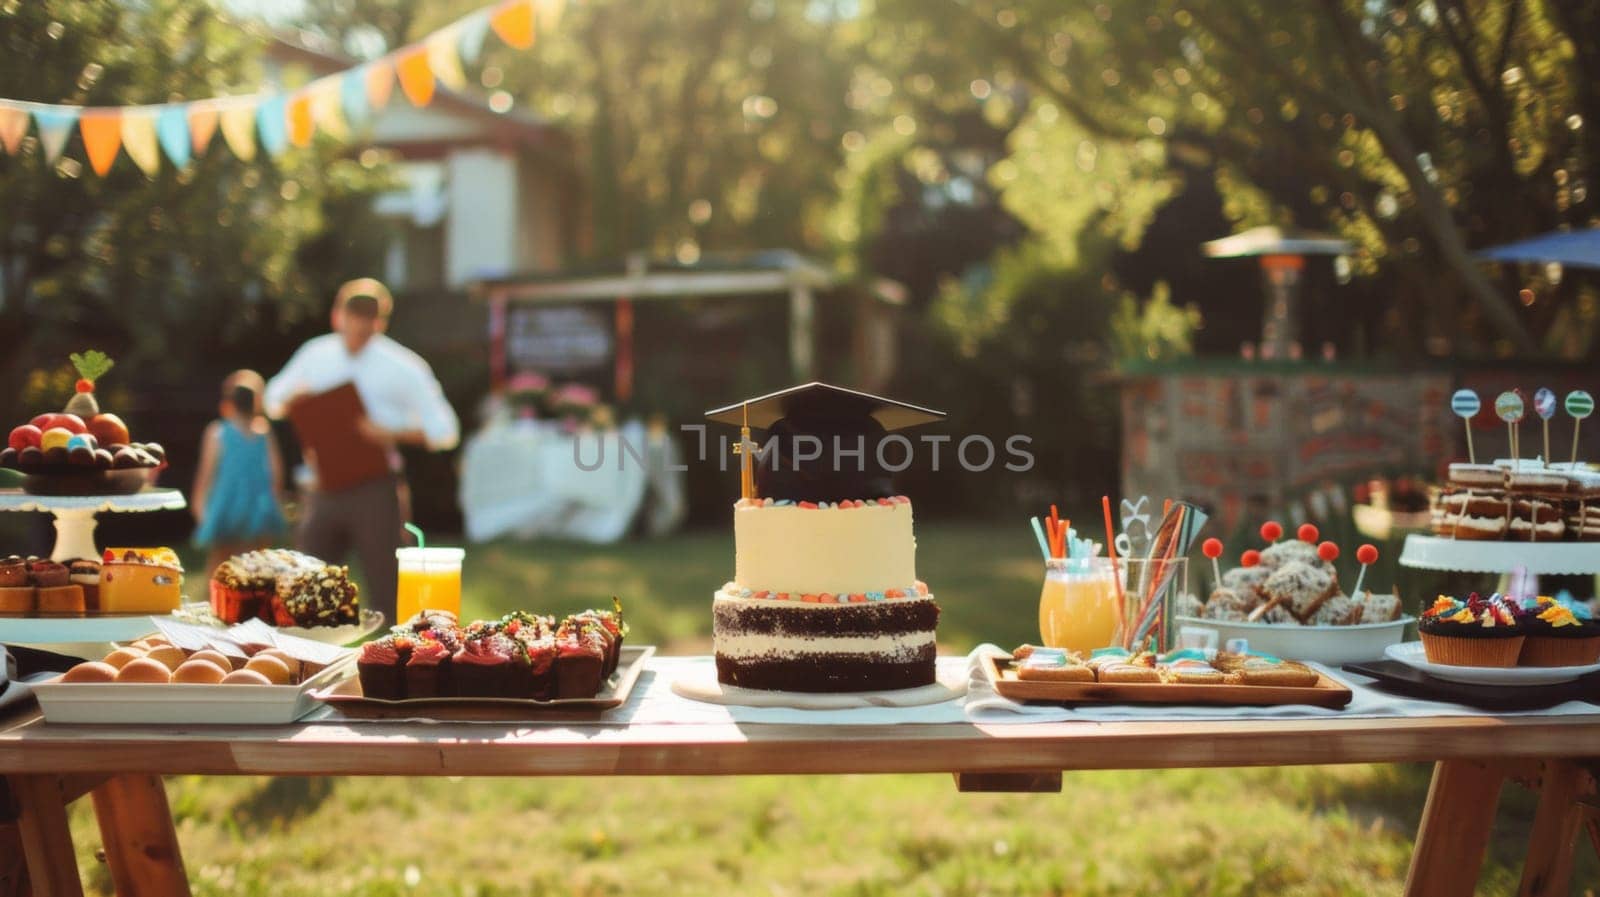 Graduation party outdoors in the garden during daylight in a sunny day. Cakes and deserts are ready by papatonic